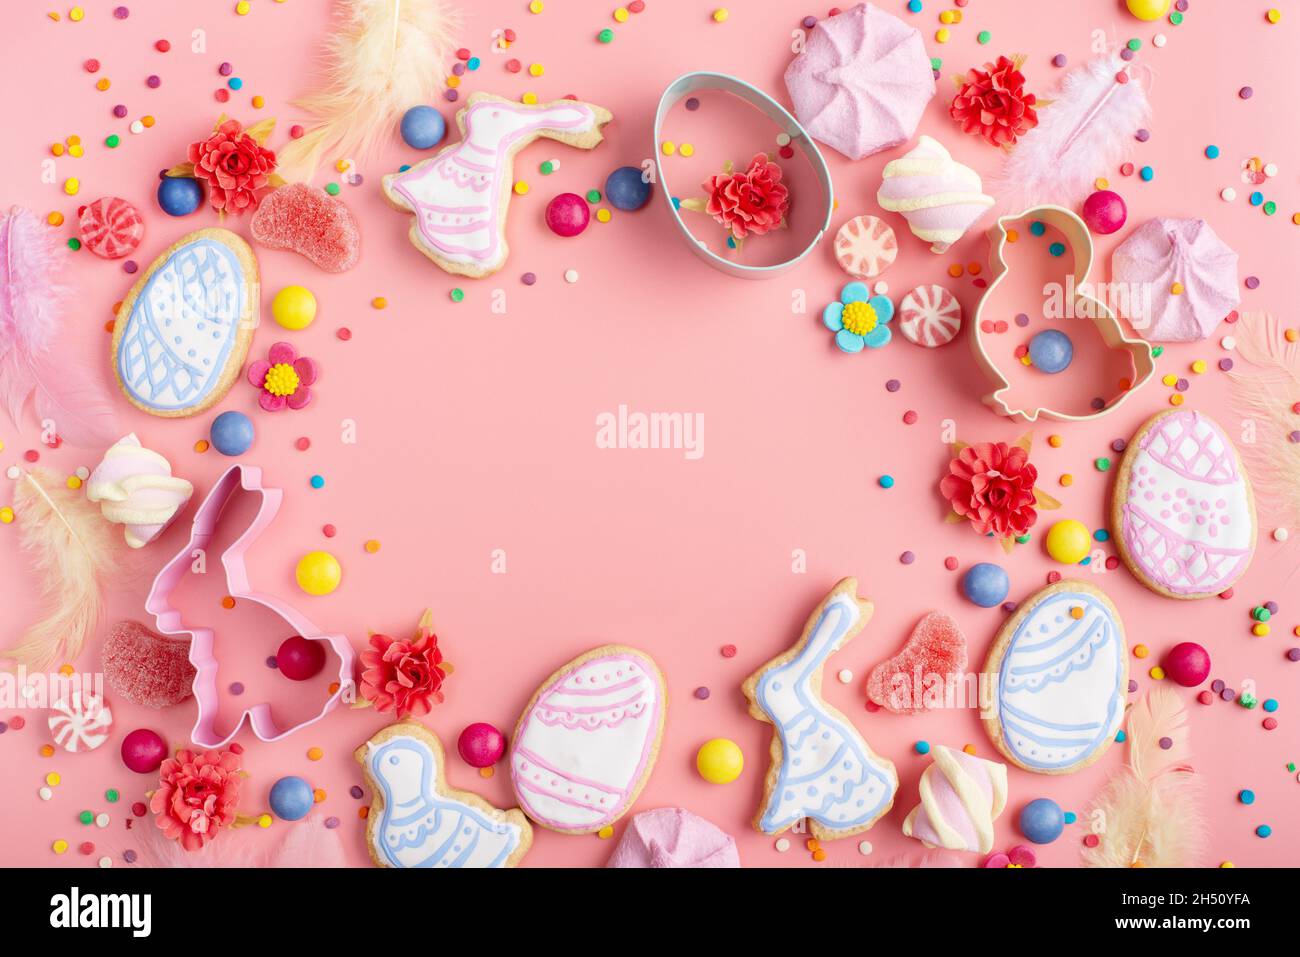 Sugar sprinkles, candies, Cookie cutters, Easter frosted cookies in shape of egg chicken and rabbit on pink background. Flat lay mockup with copy spac Stock Photo